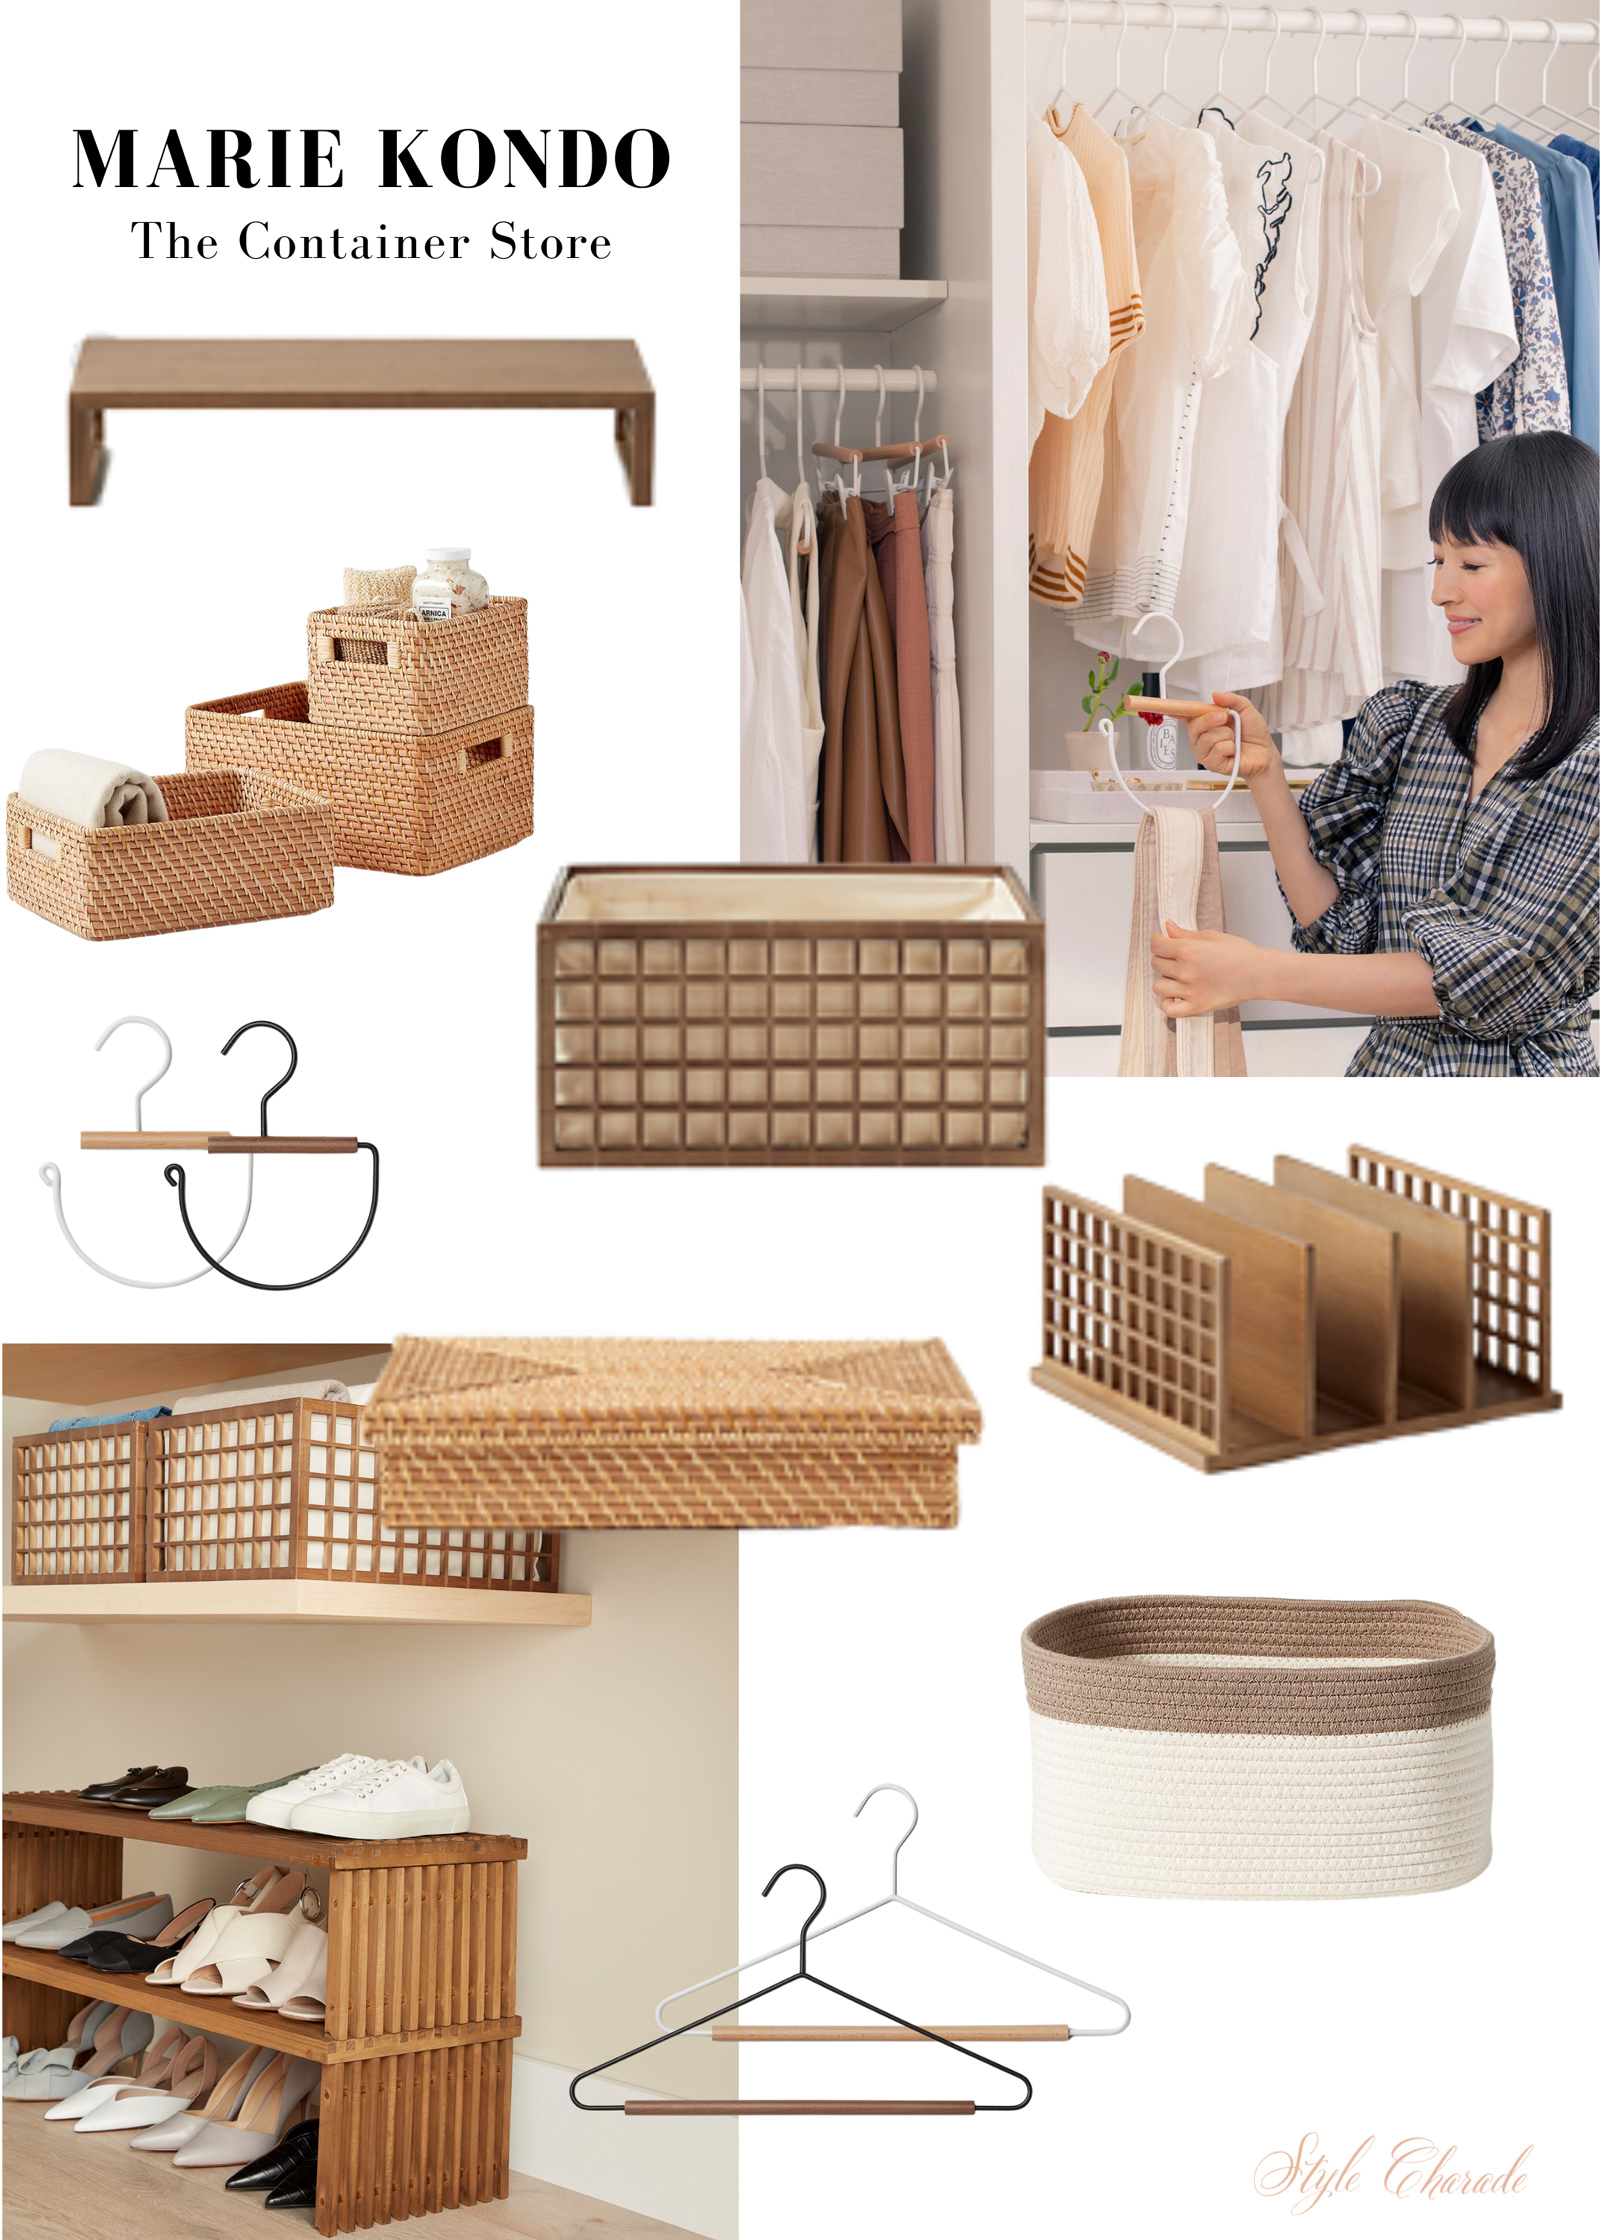 https://www.stylecharade.com/wp-content/uploads/2021/01/Container-Store-Marie-Kondo-Products.jpg